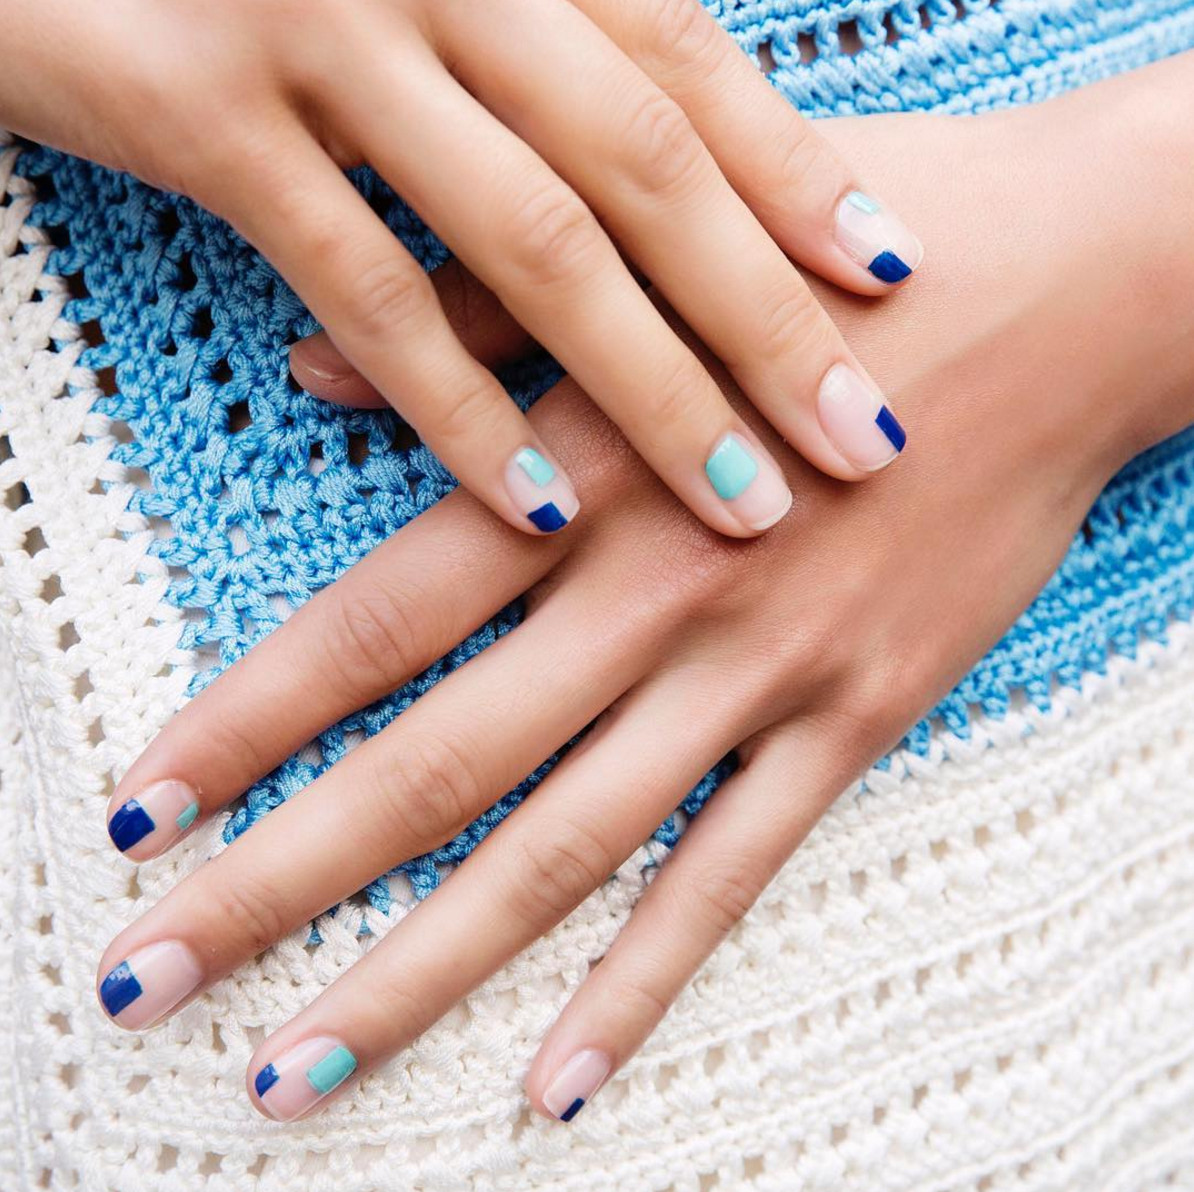 Trending Nail Colors
 The Best Nail Polish Colors and Trends for Spring 2017